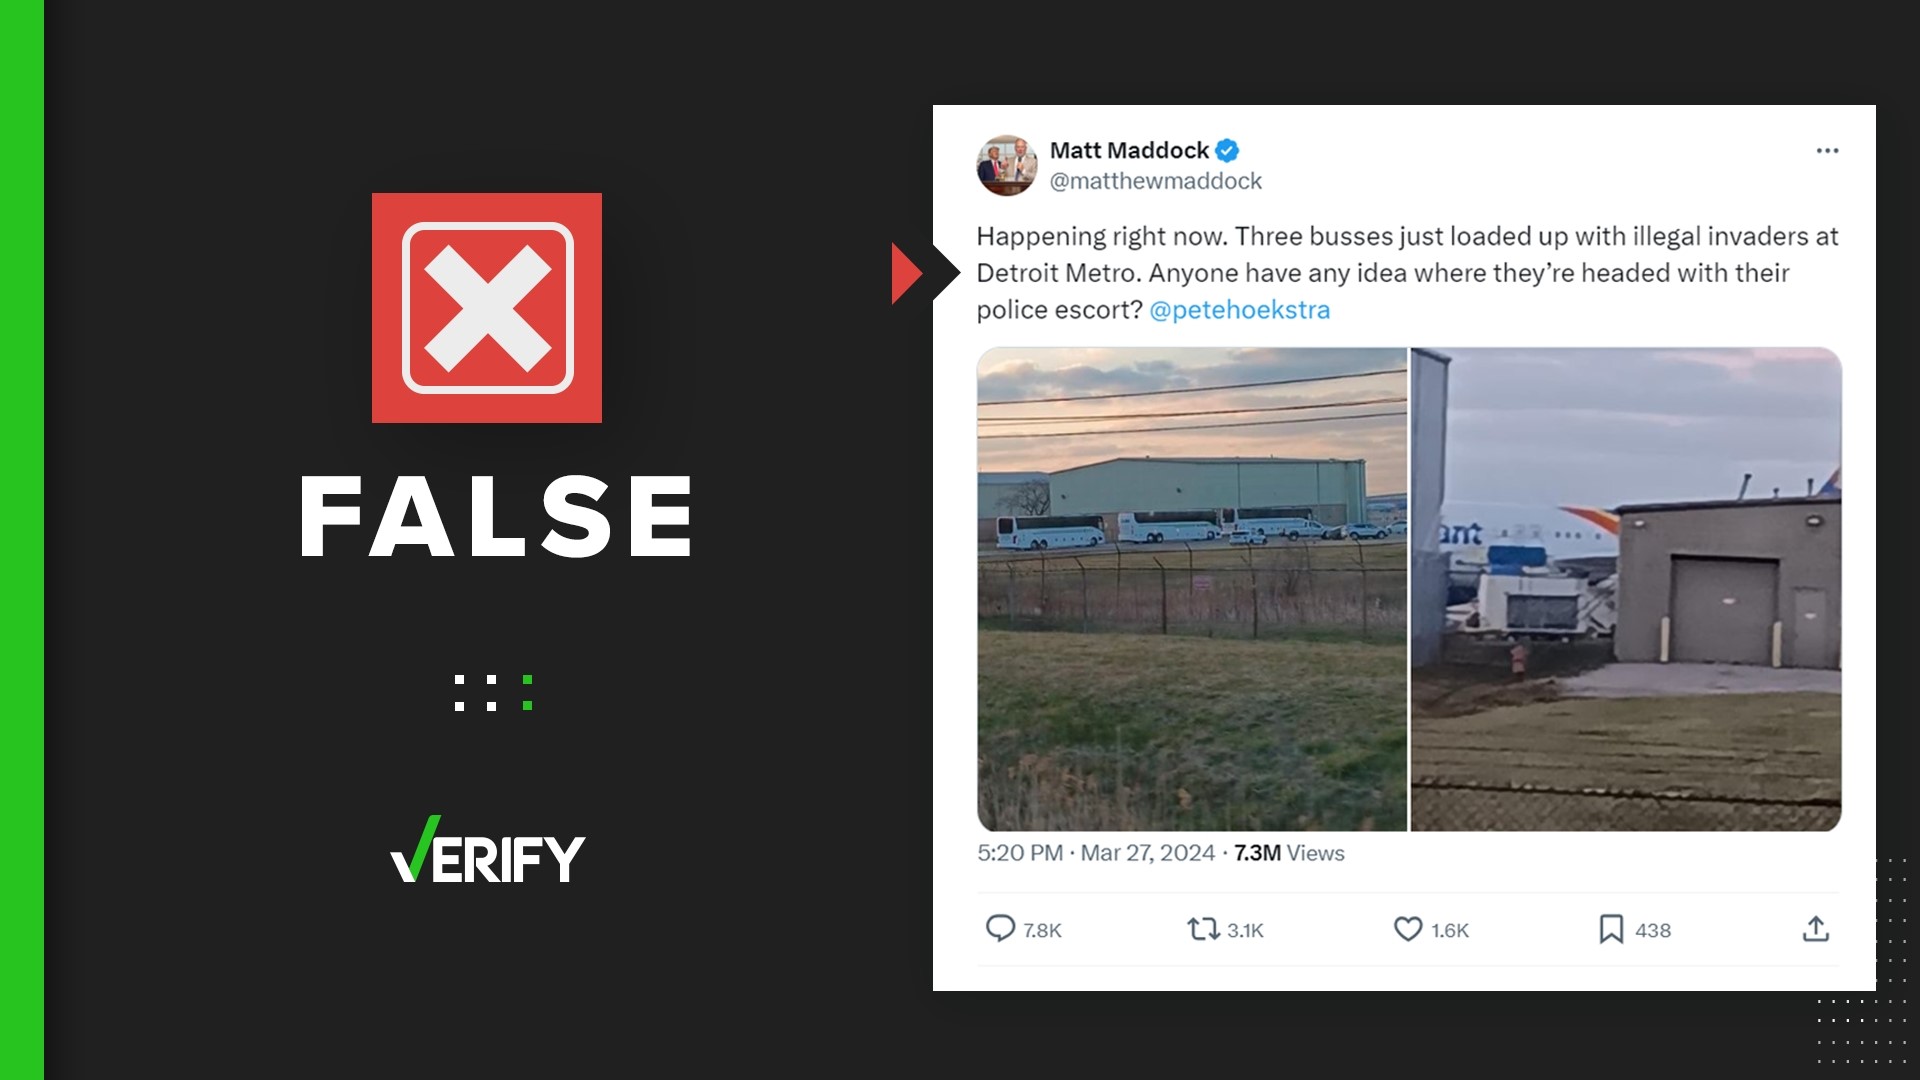 A Michigan state representative claimed two photos showed “illegal invaders” boarding buses at a Detroit airport. Here’s how we know that’s not true.